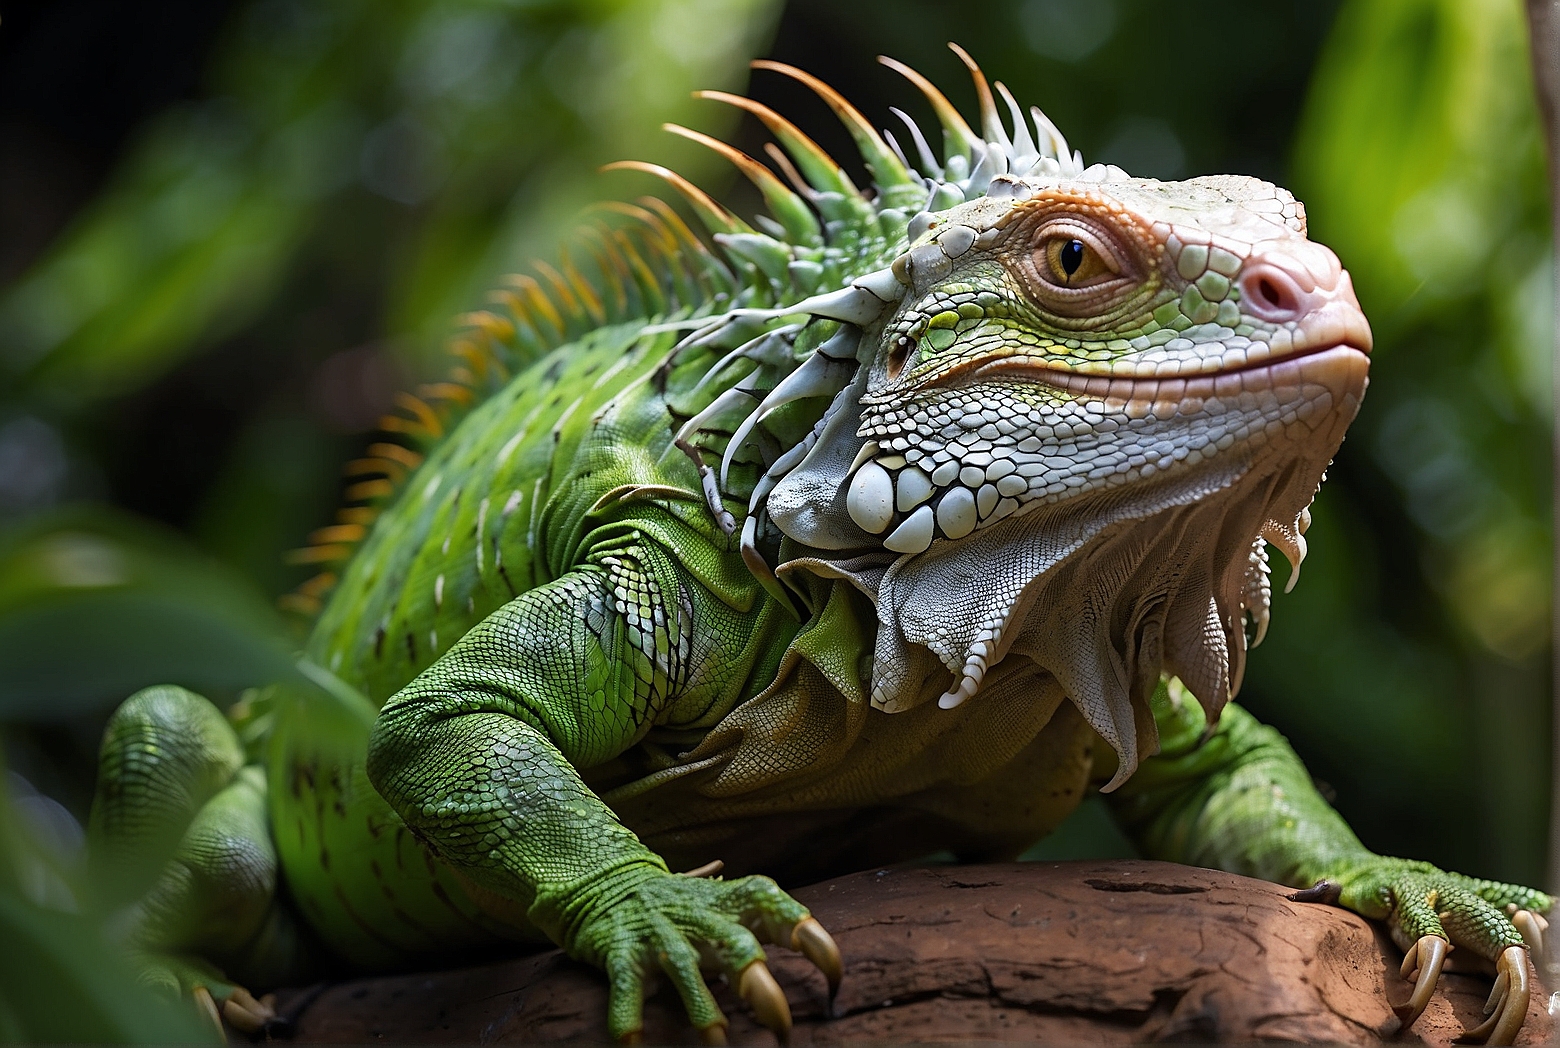 The Ultimate Guide to Keeping a Green Iguana as a Pet